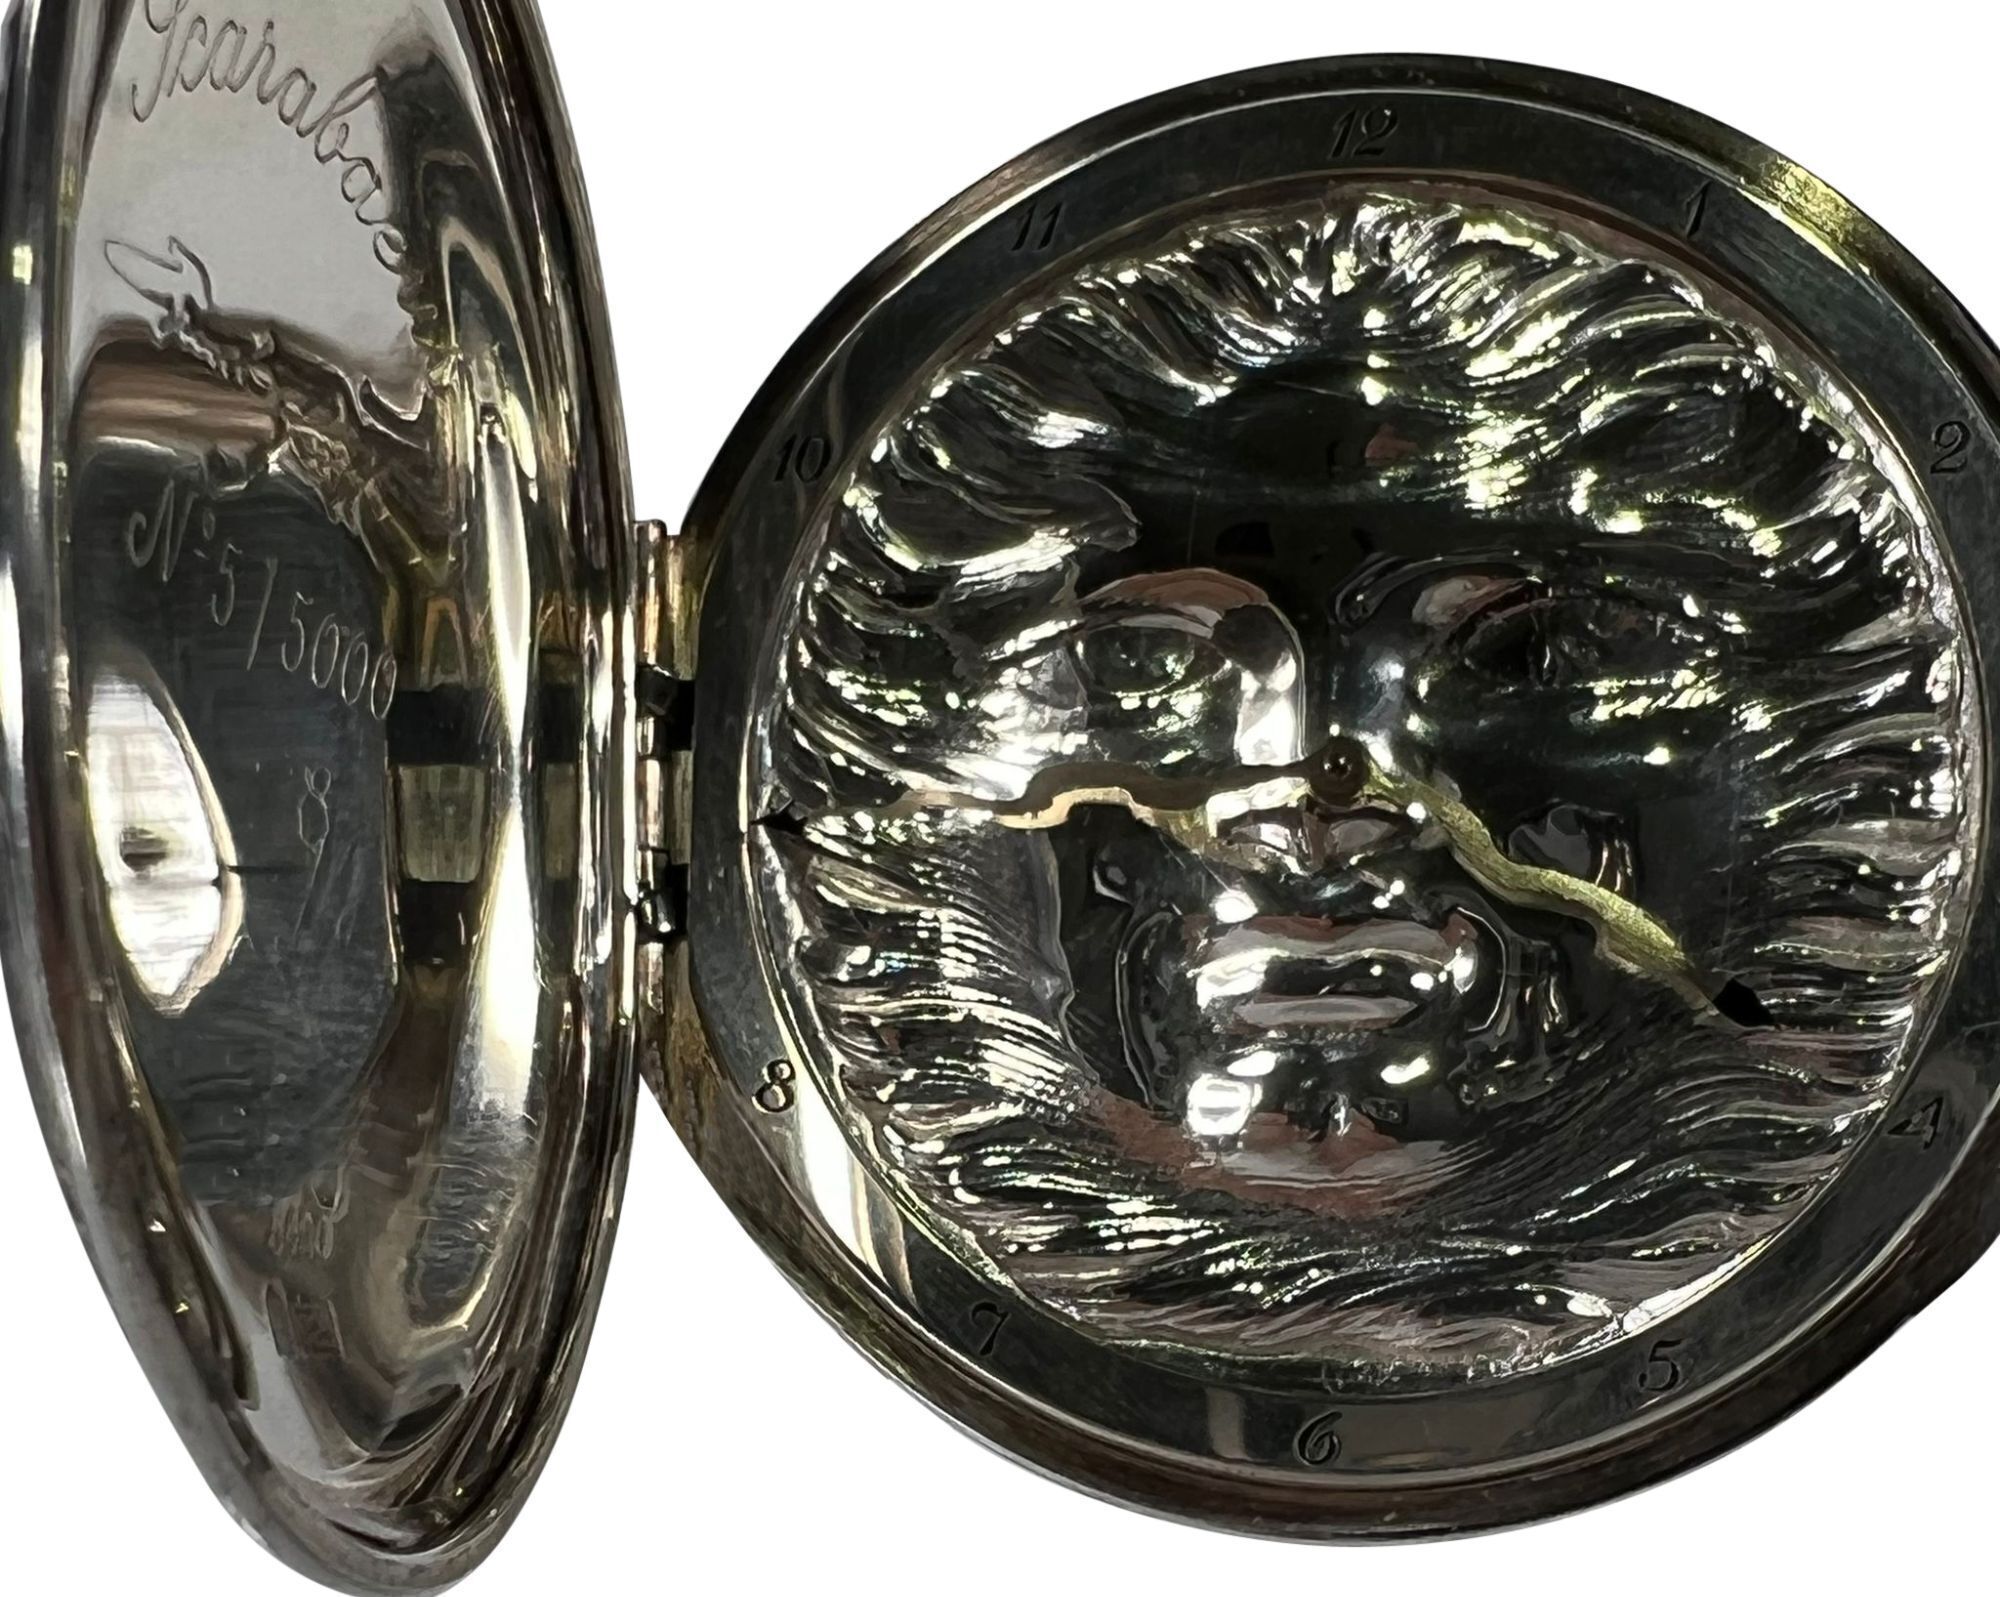 IWC Scarabaeus Limited Edition Silver Hunting Case Pocket Watch